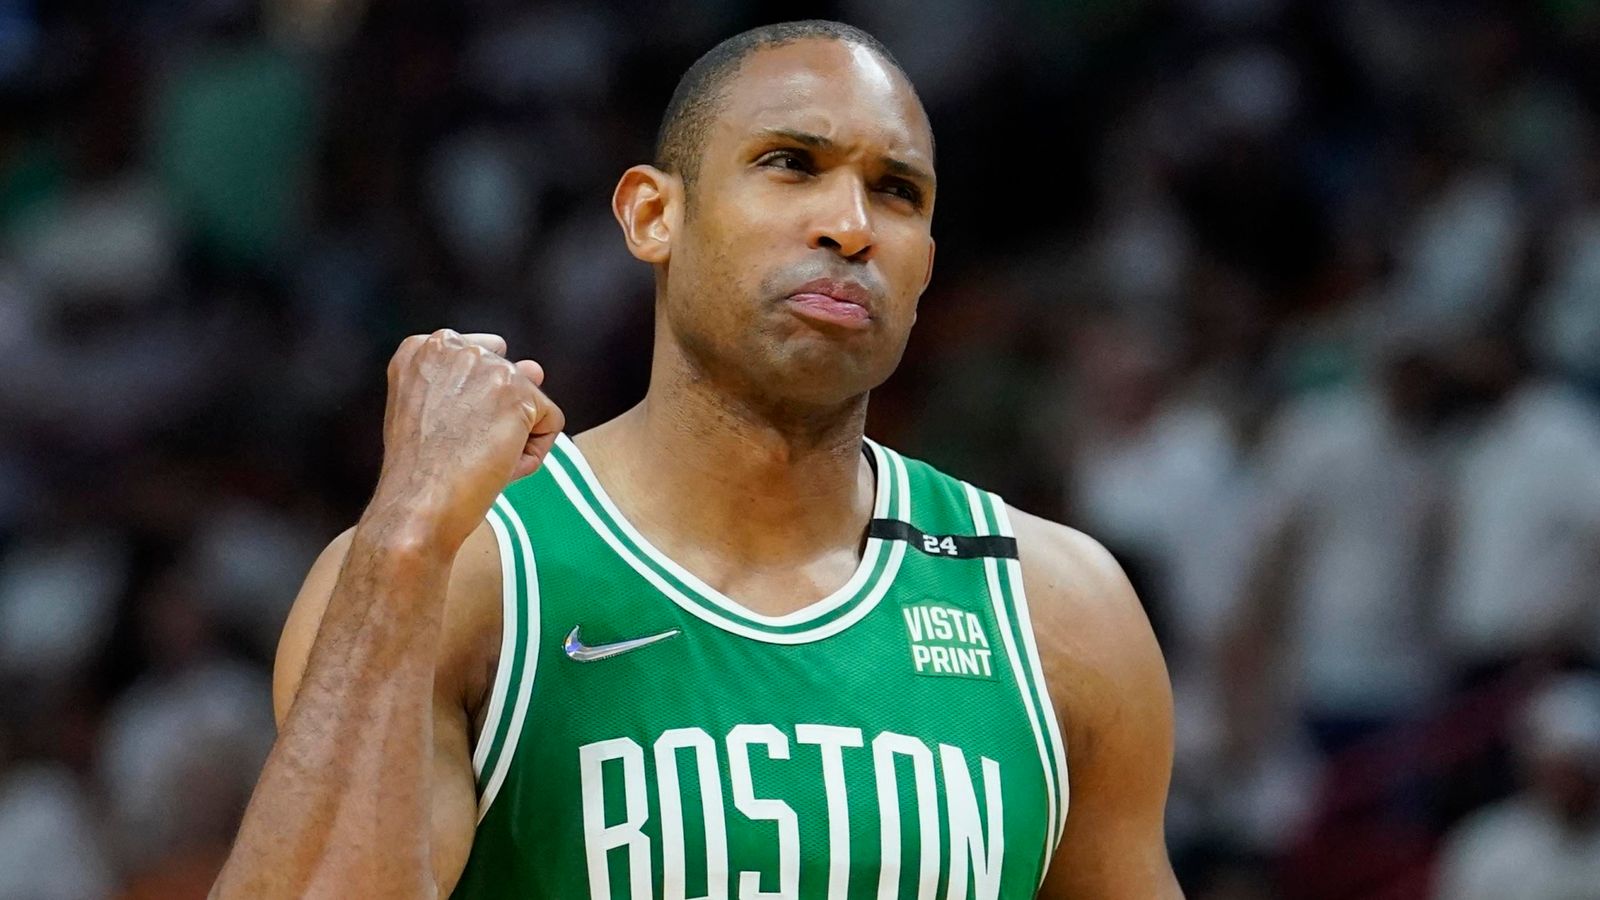 Al Horford: Boston Celtics big man's NBA Finals appearance provides ideal  opportunity to cap 15-year career | NBA News | Sky Sports